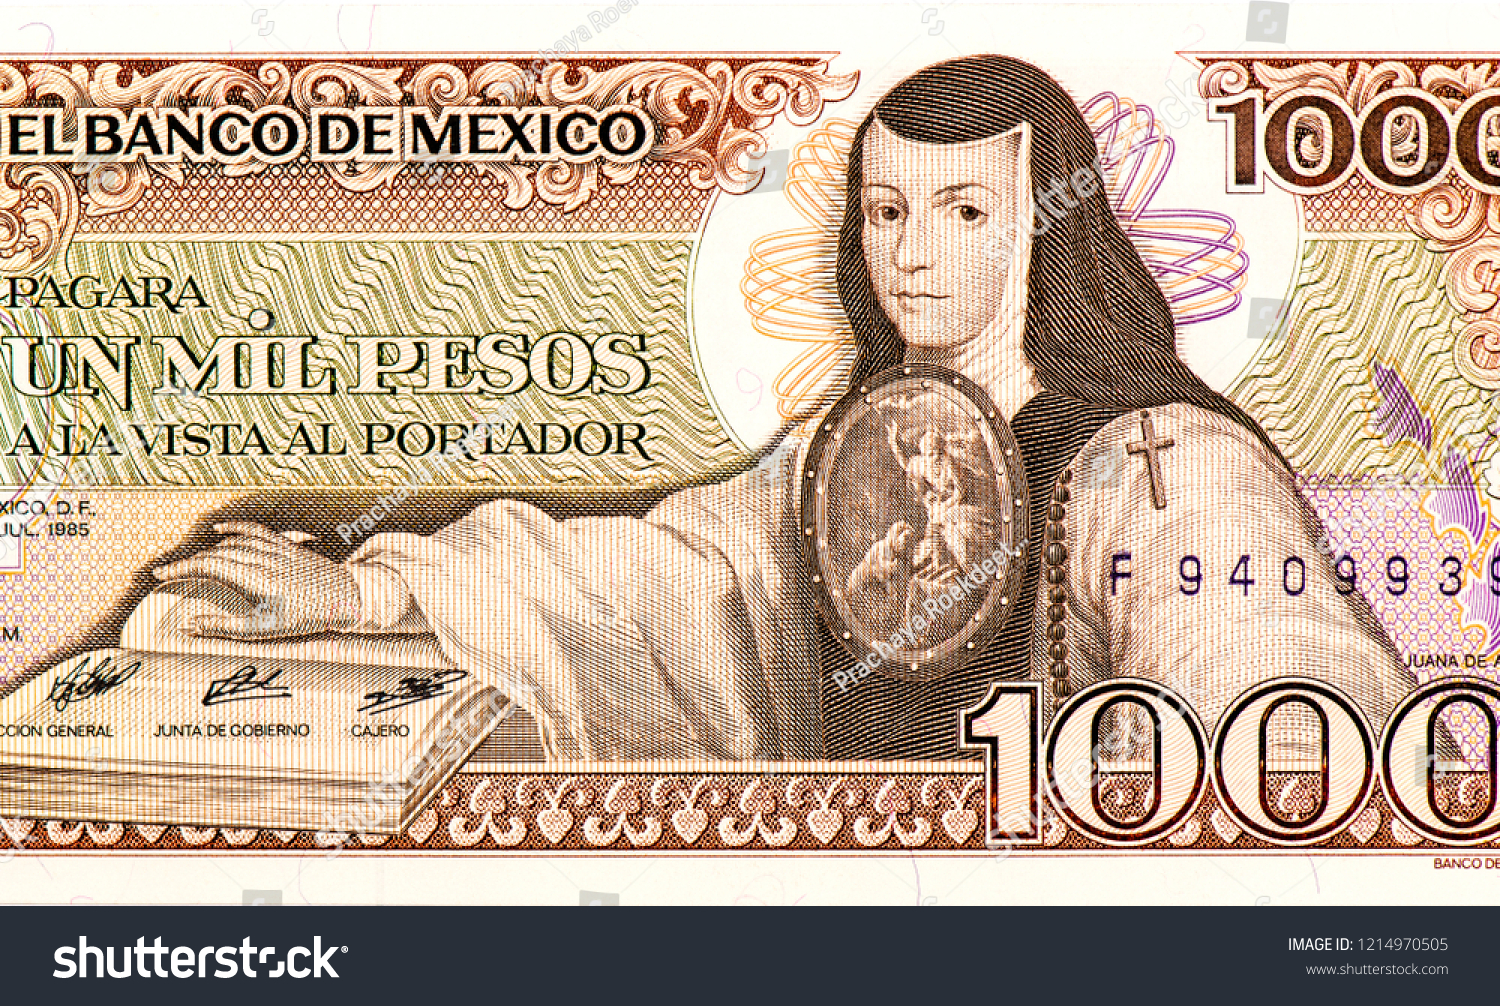 Mexican Currency Sor Juana Ines 1000ps 1980s no watermark antiquated rough shape 